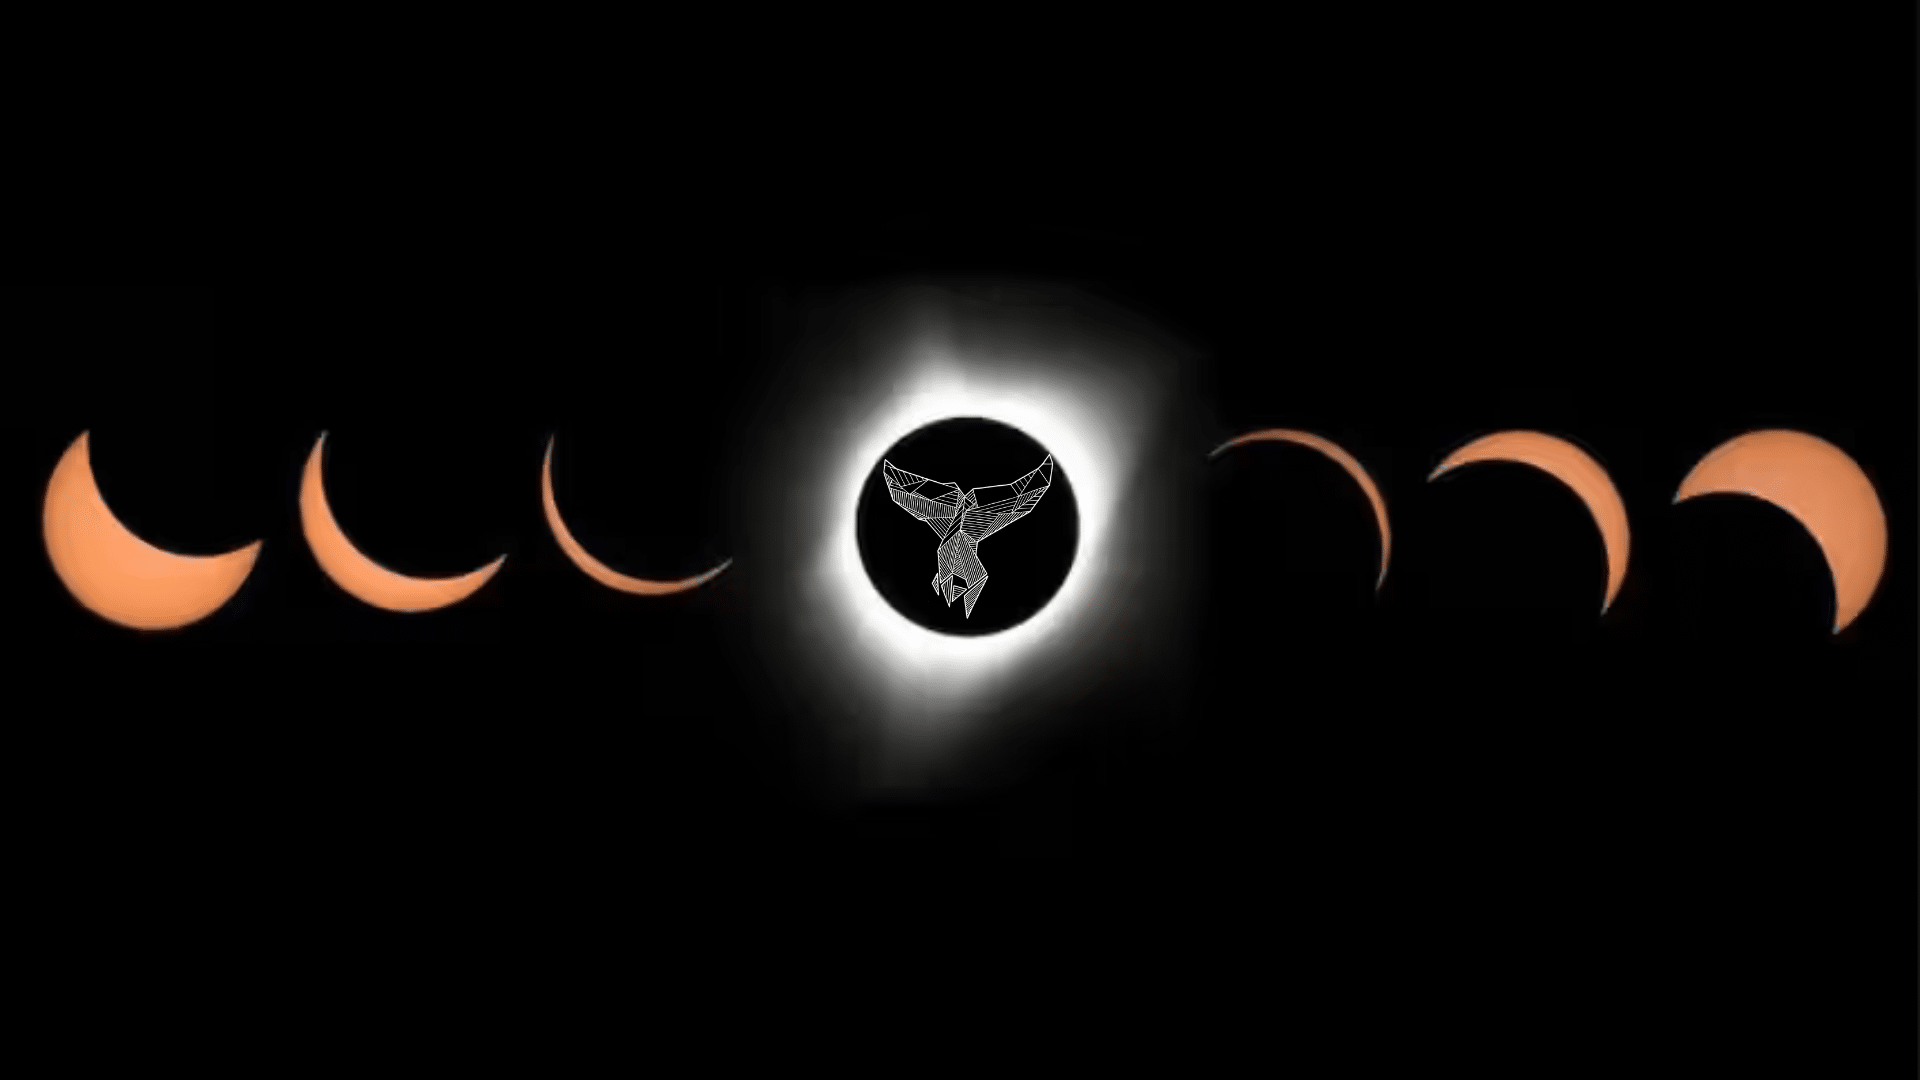 Eclipse Viewing Party :: $5 Pivo Pils